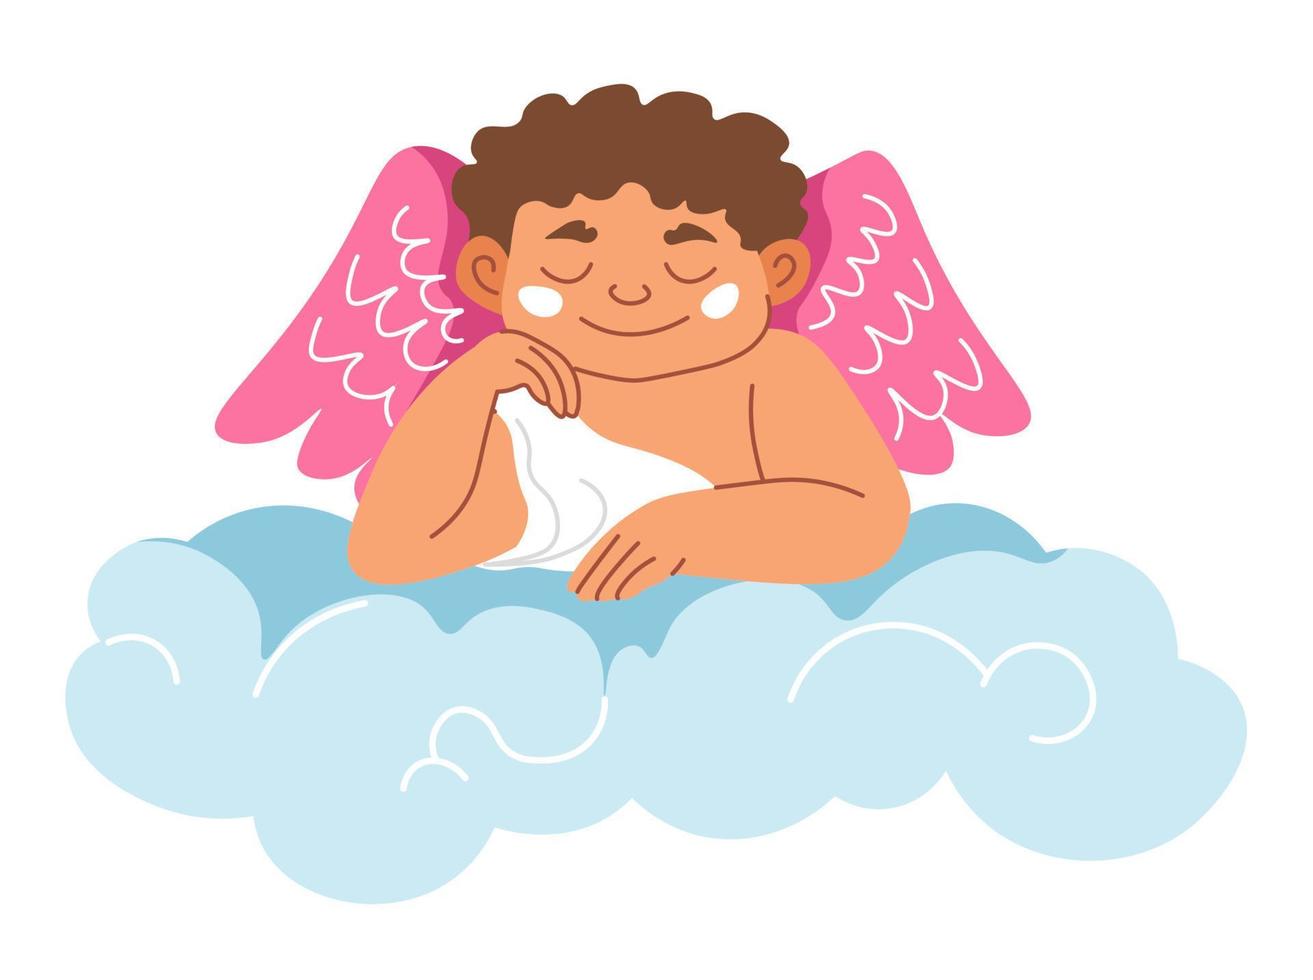 Kid angel with wings sitting on cloud in haven vector